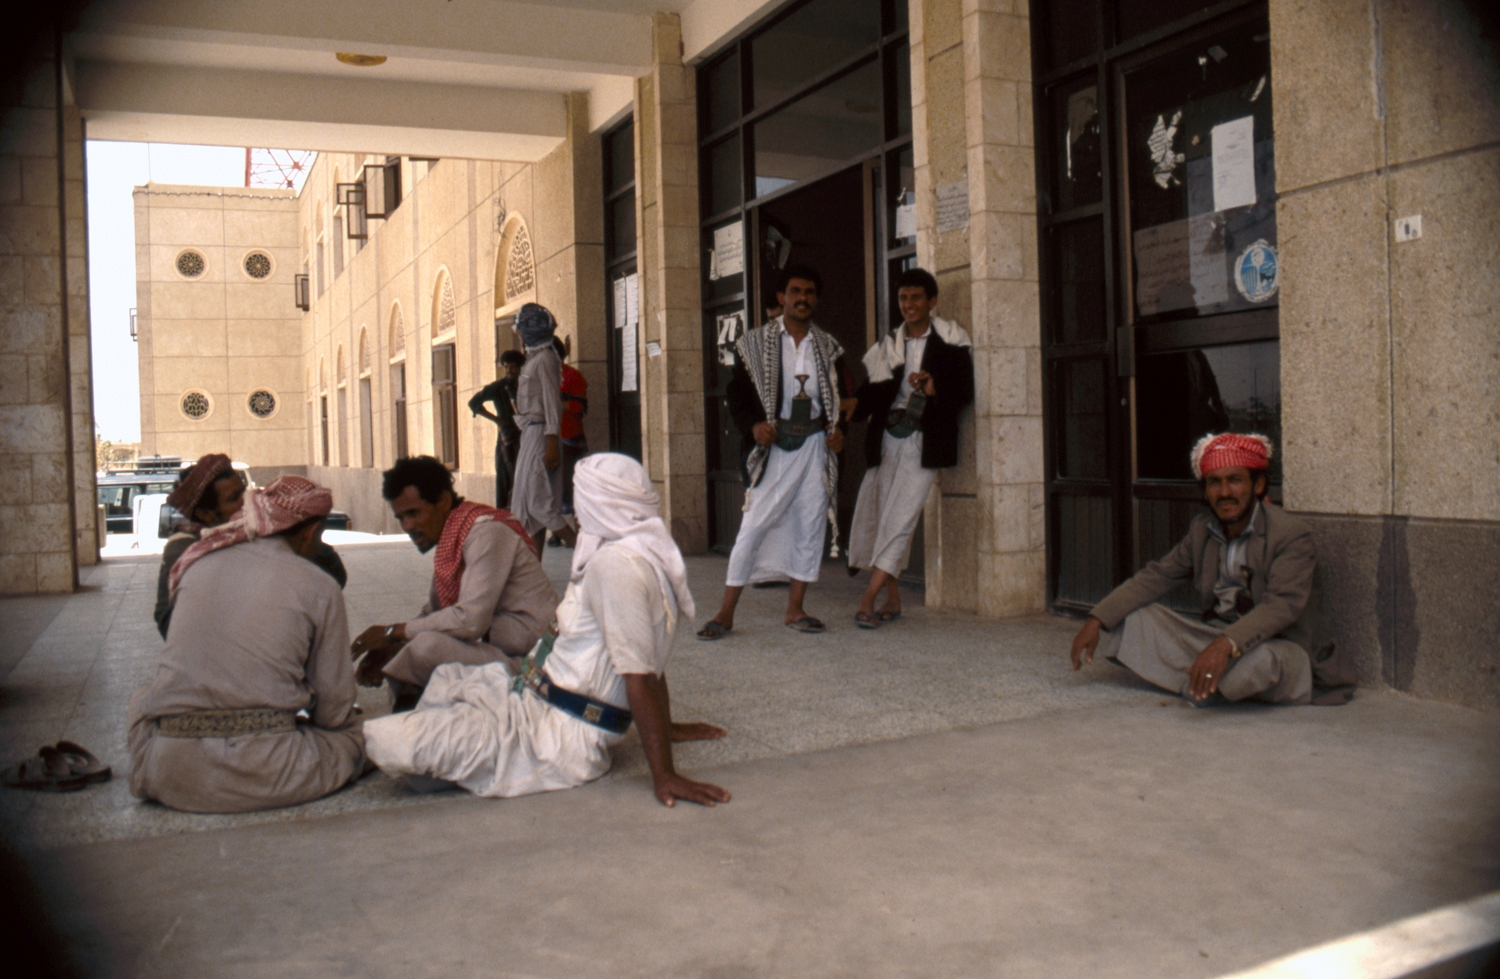 Marib government. Ethnographic views. Men on the portico of an unidentified building.